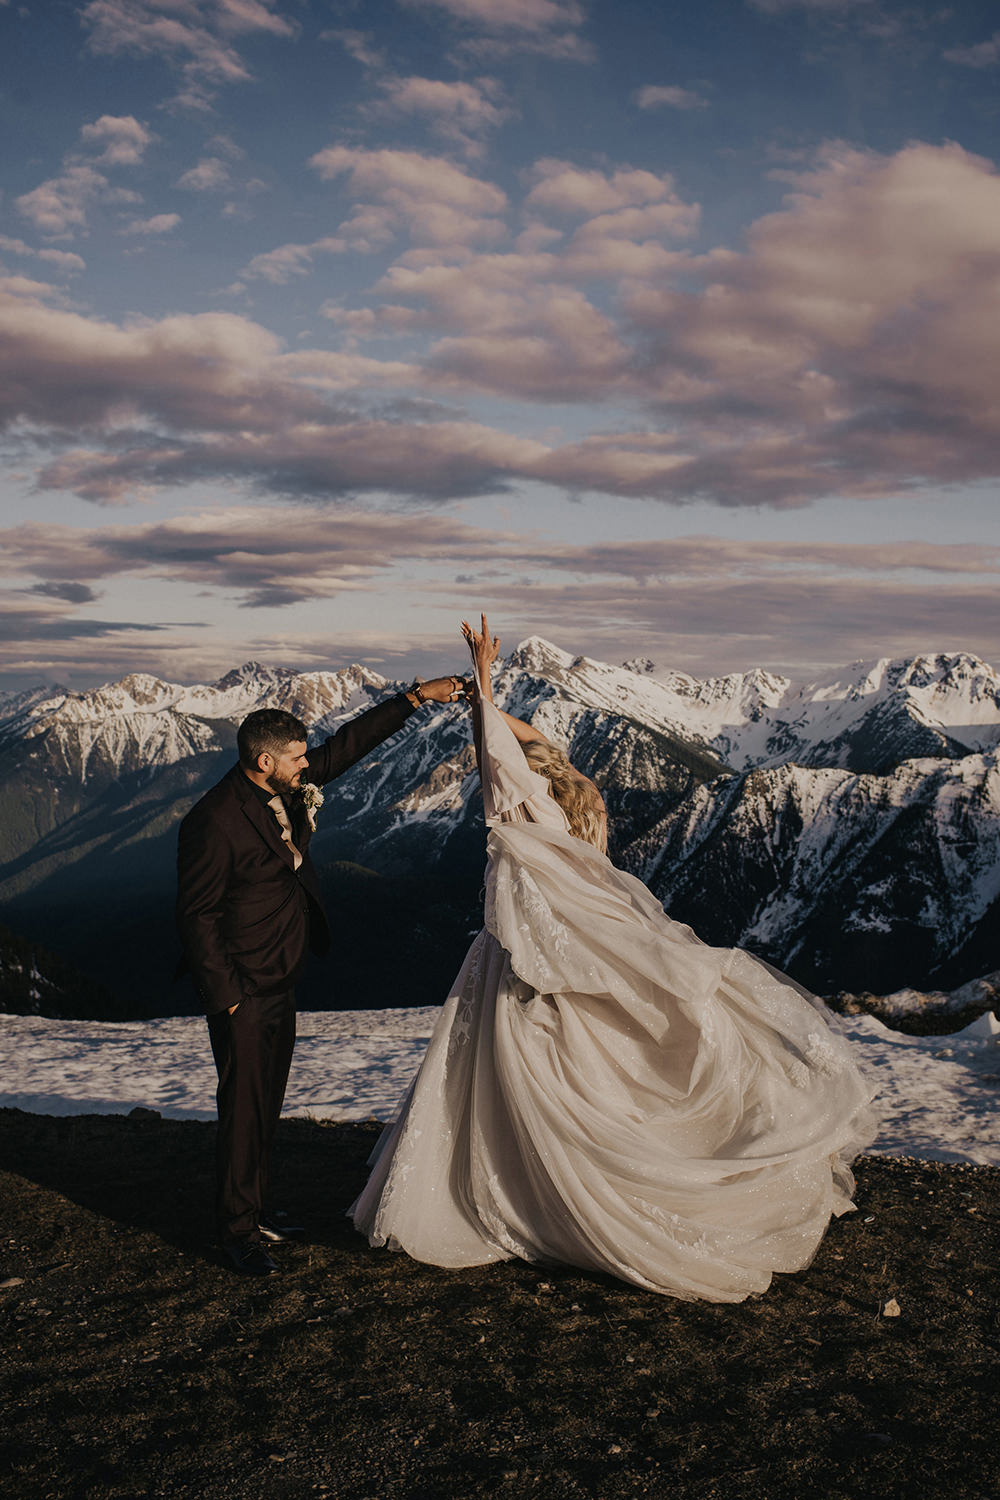 Dancing wedding photo on the top of Kicking horse mountain